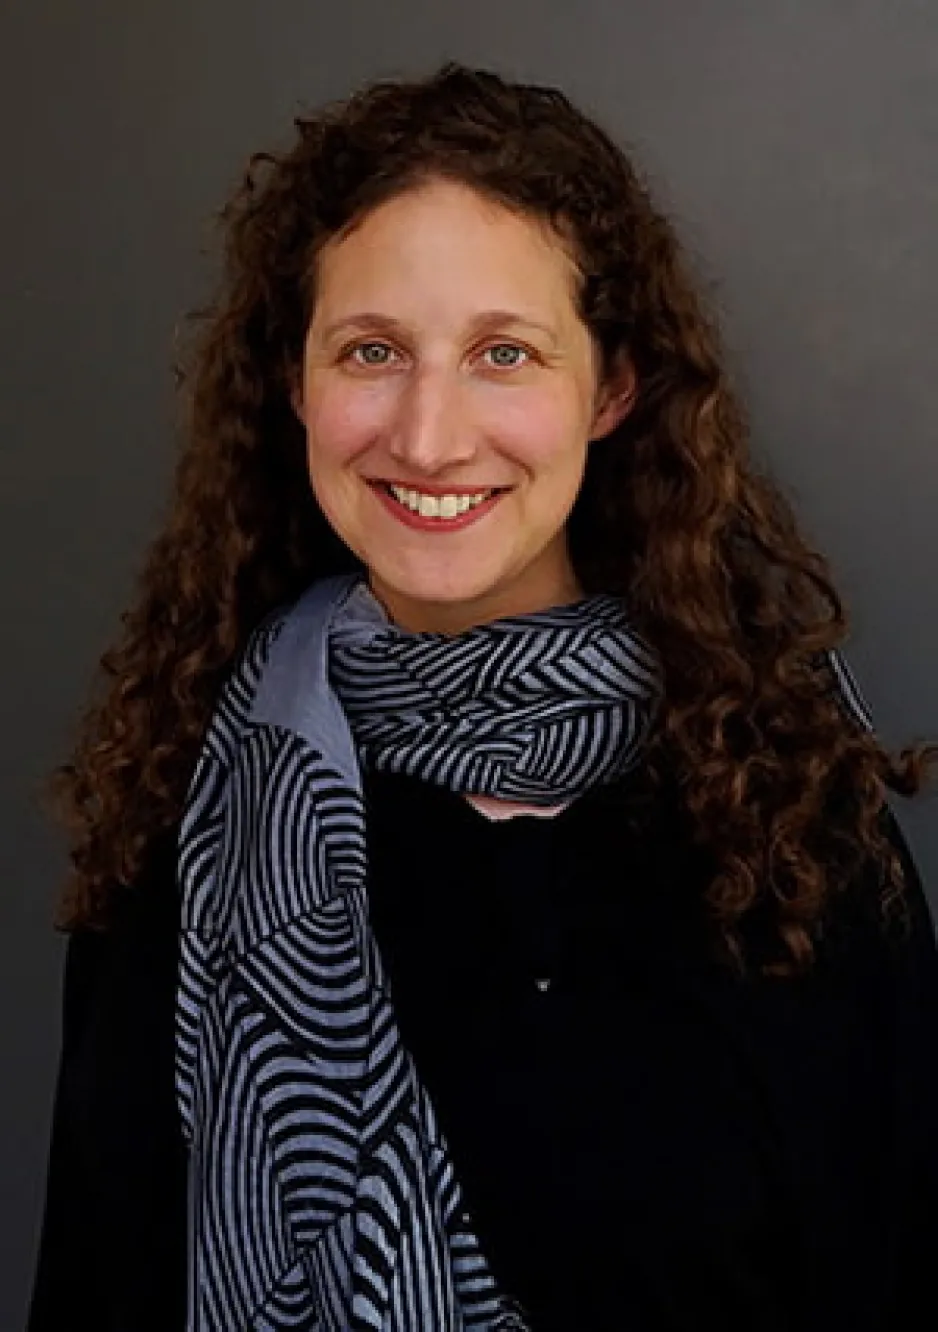 Dr. Rebecca Clare Dolgoy. A young woman with dark, curly hair smiles widely at the camera. She is wearing a dark shirt and a striped blue scarf.